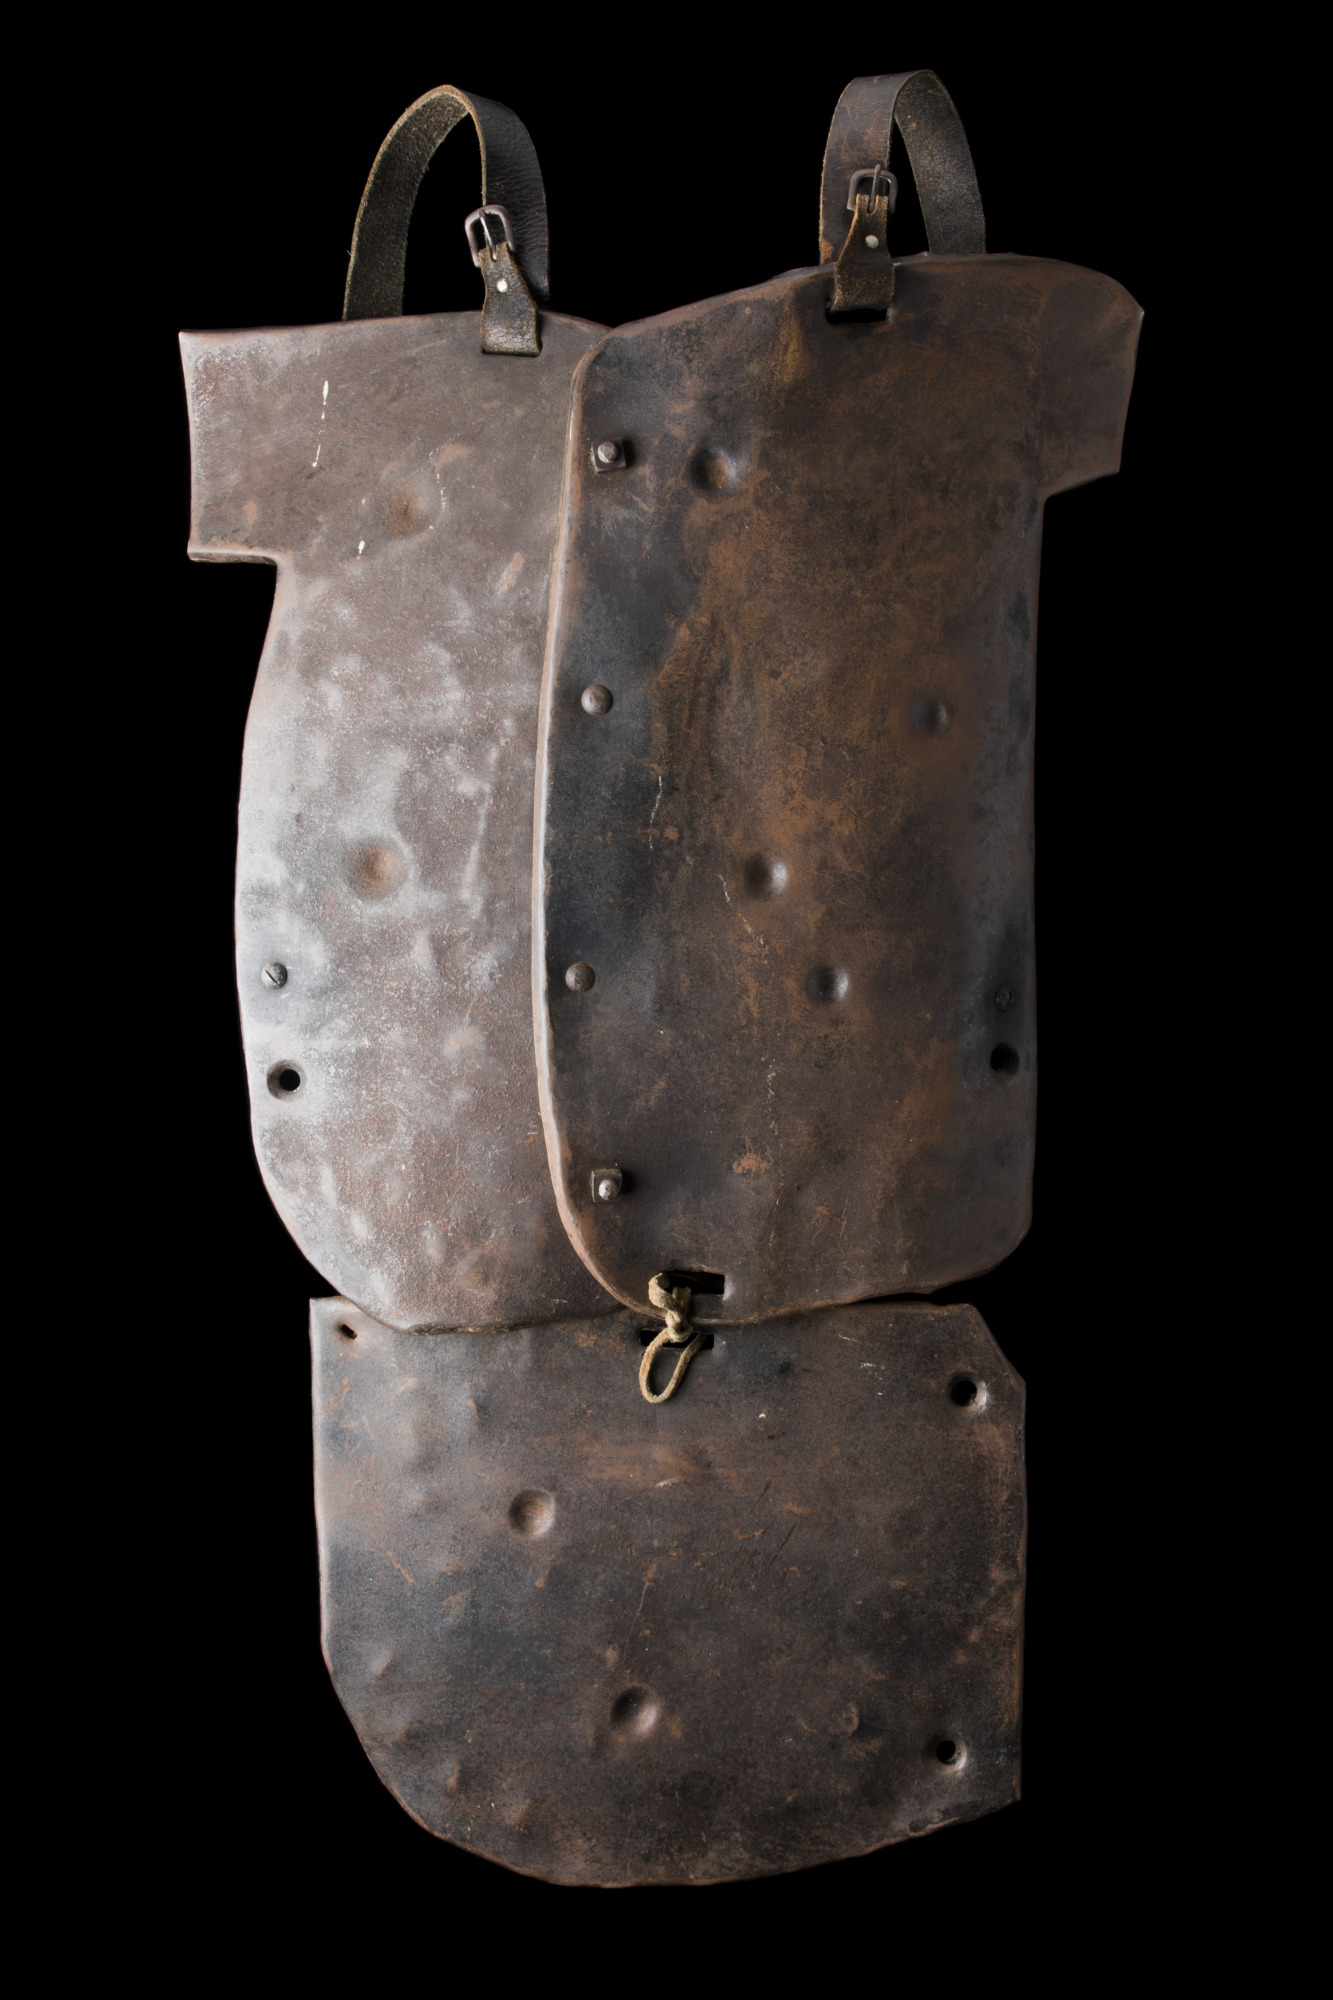 A replica of Ned Kelly's body armour.